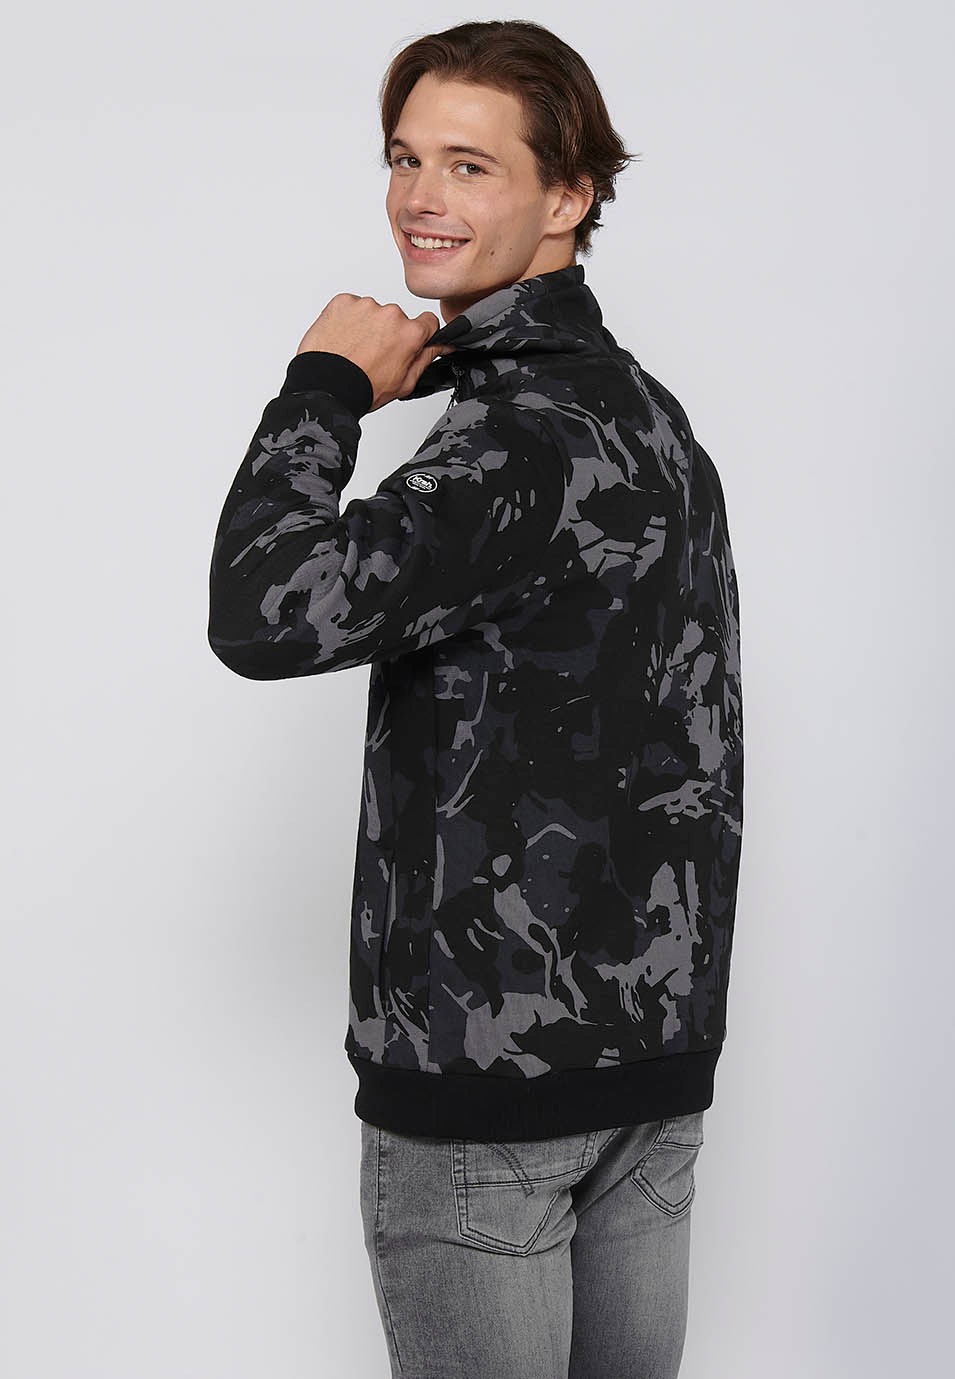 Long-sleeved sweatshirt with high neck, zipper and front printed detail in Black for Men